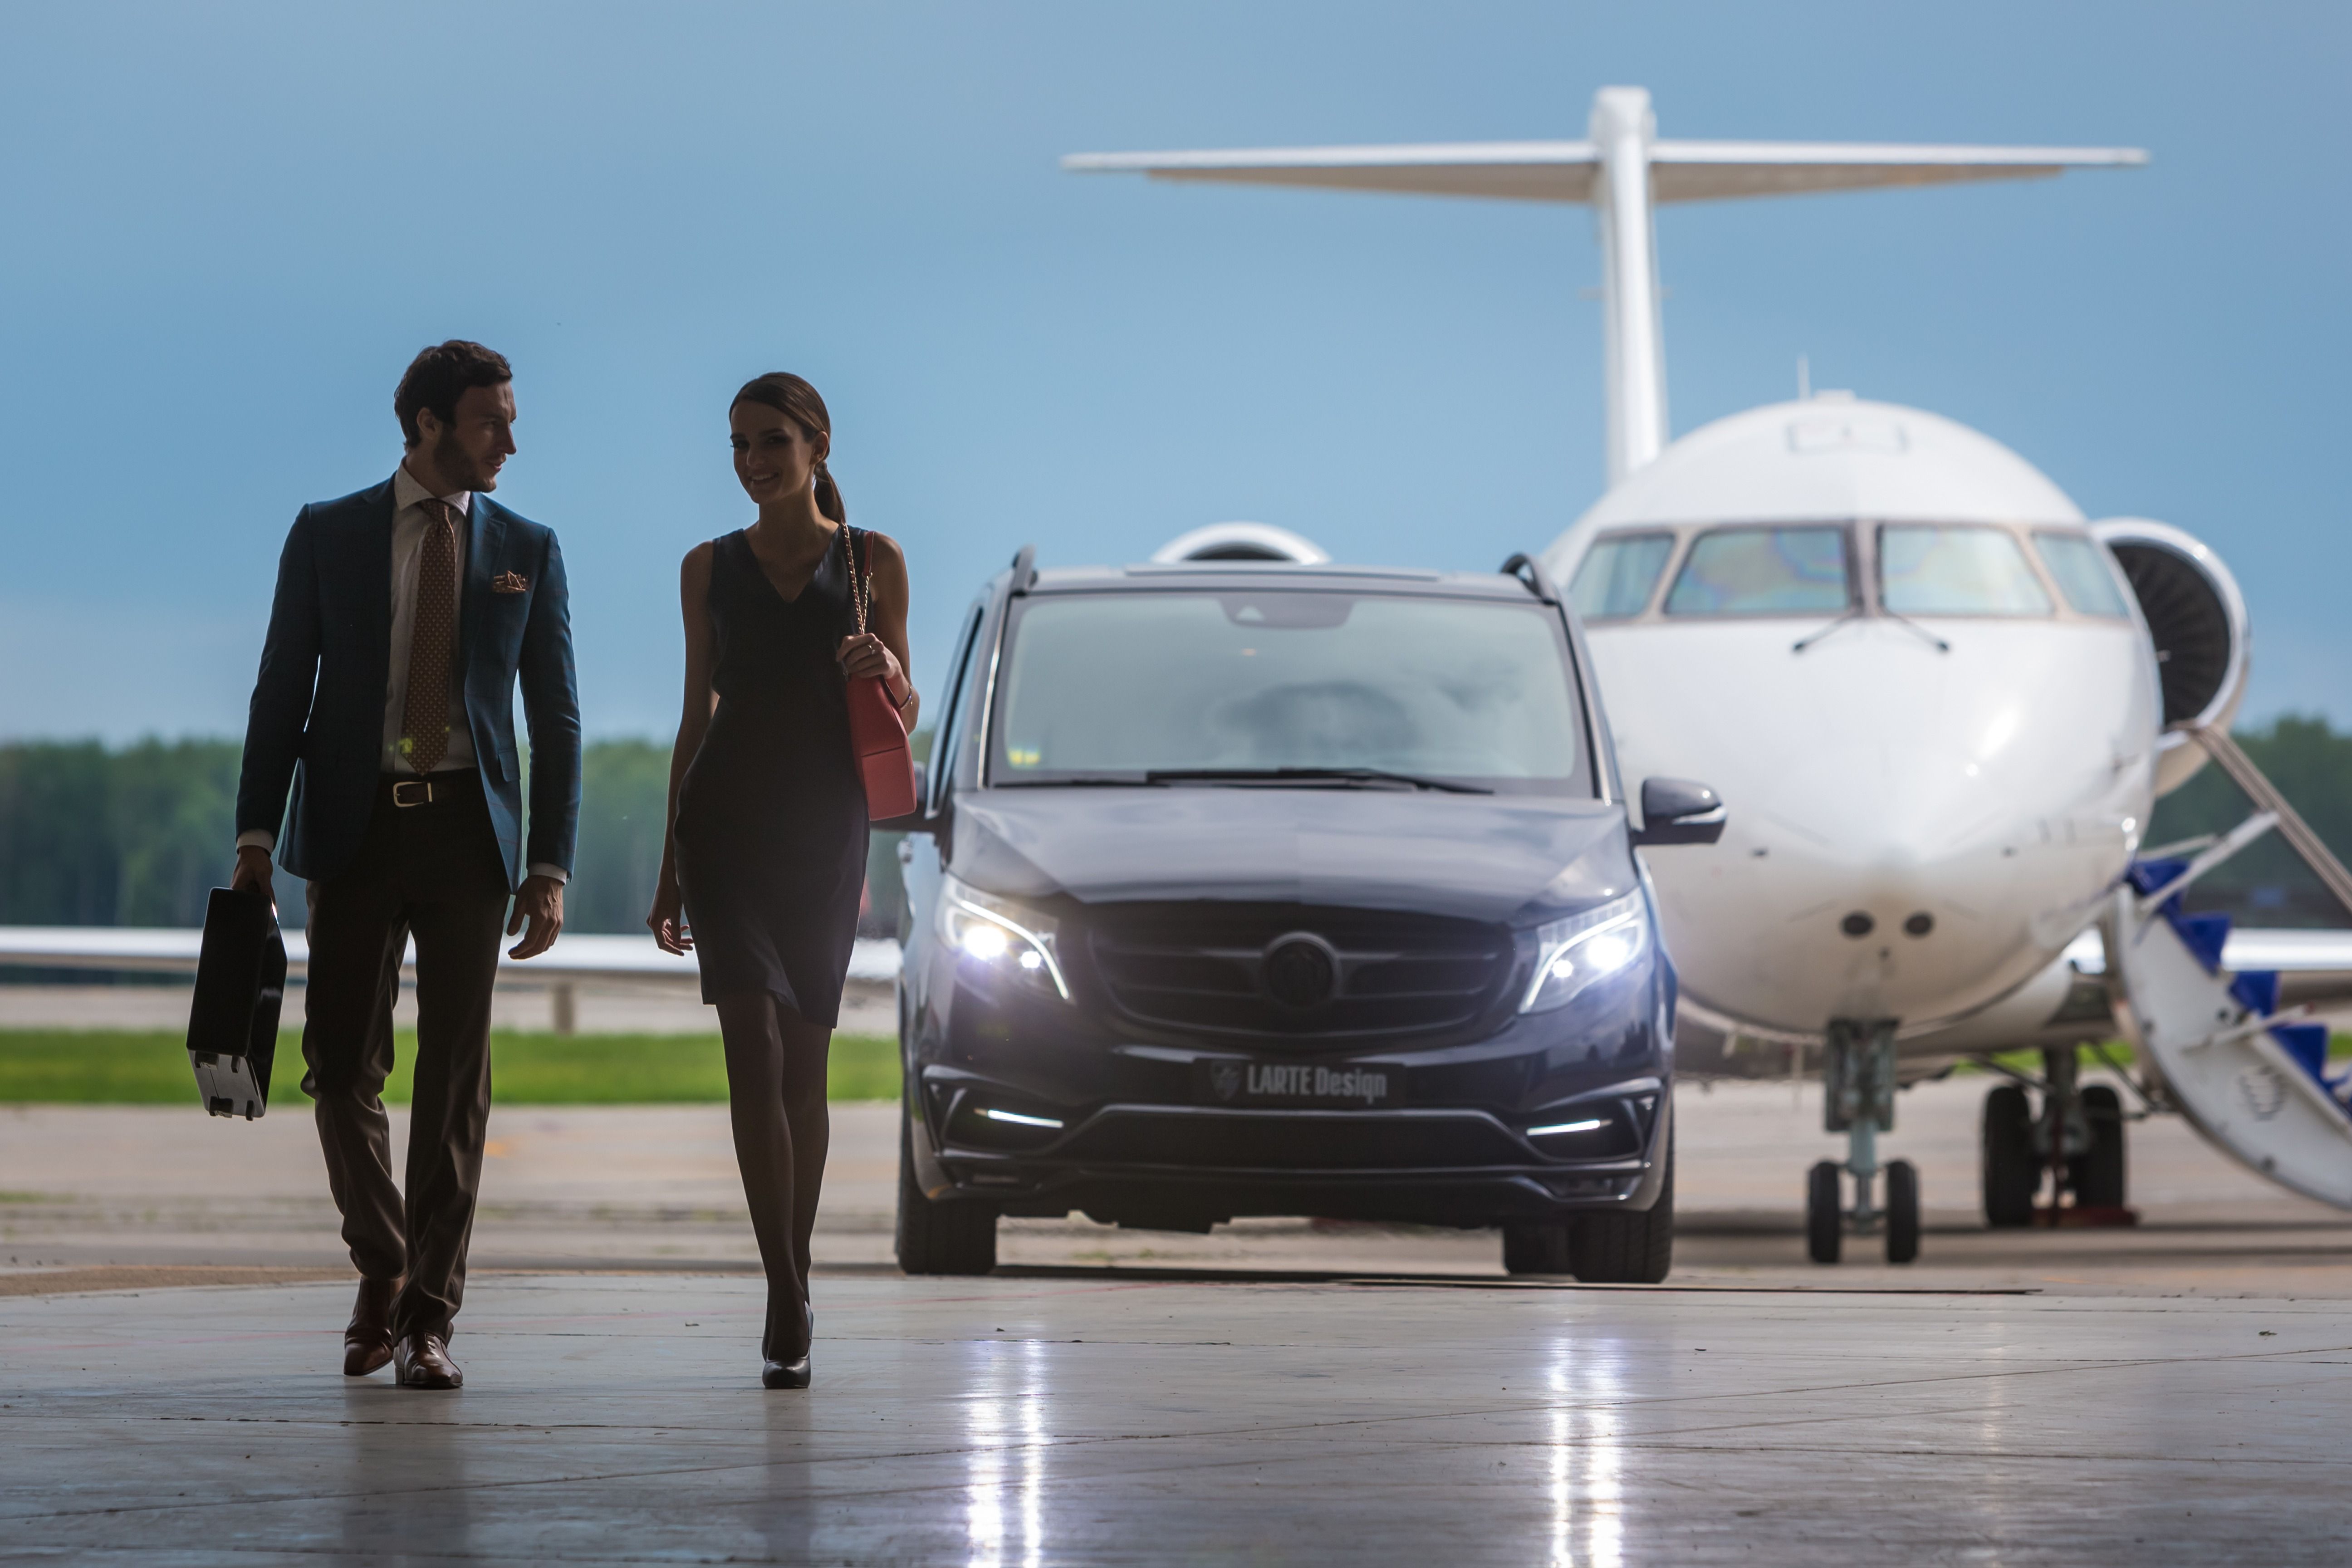 Two individuals in business attire walking away from a private aircraft parked on an airport apron.